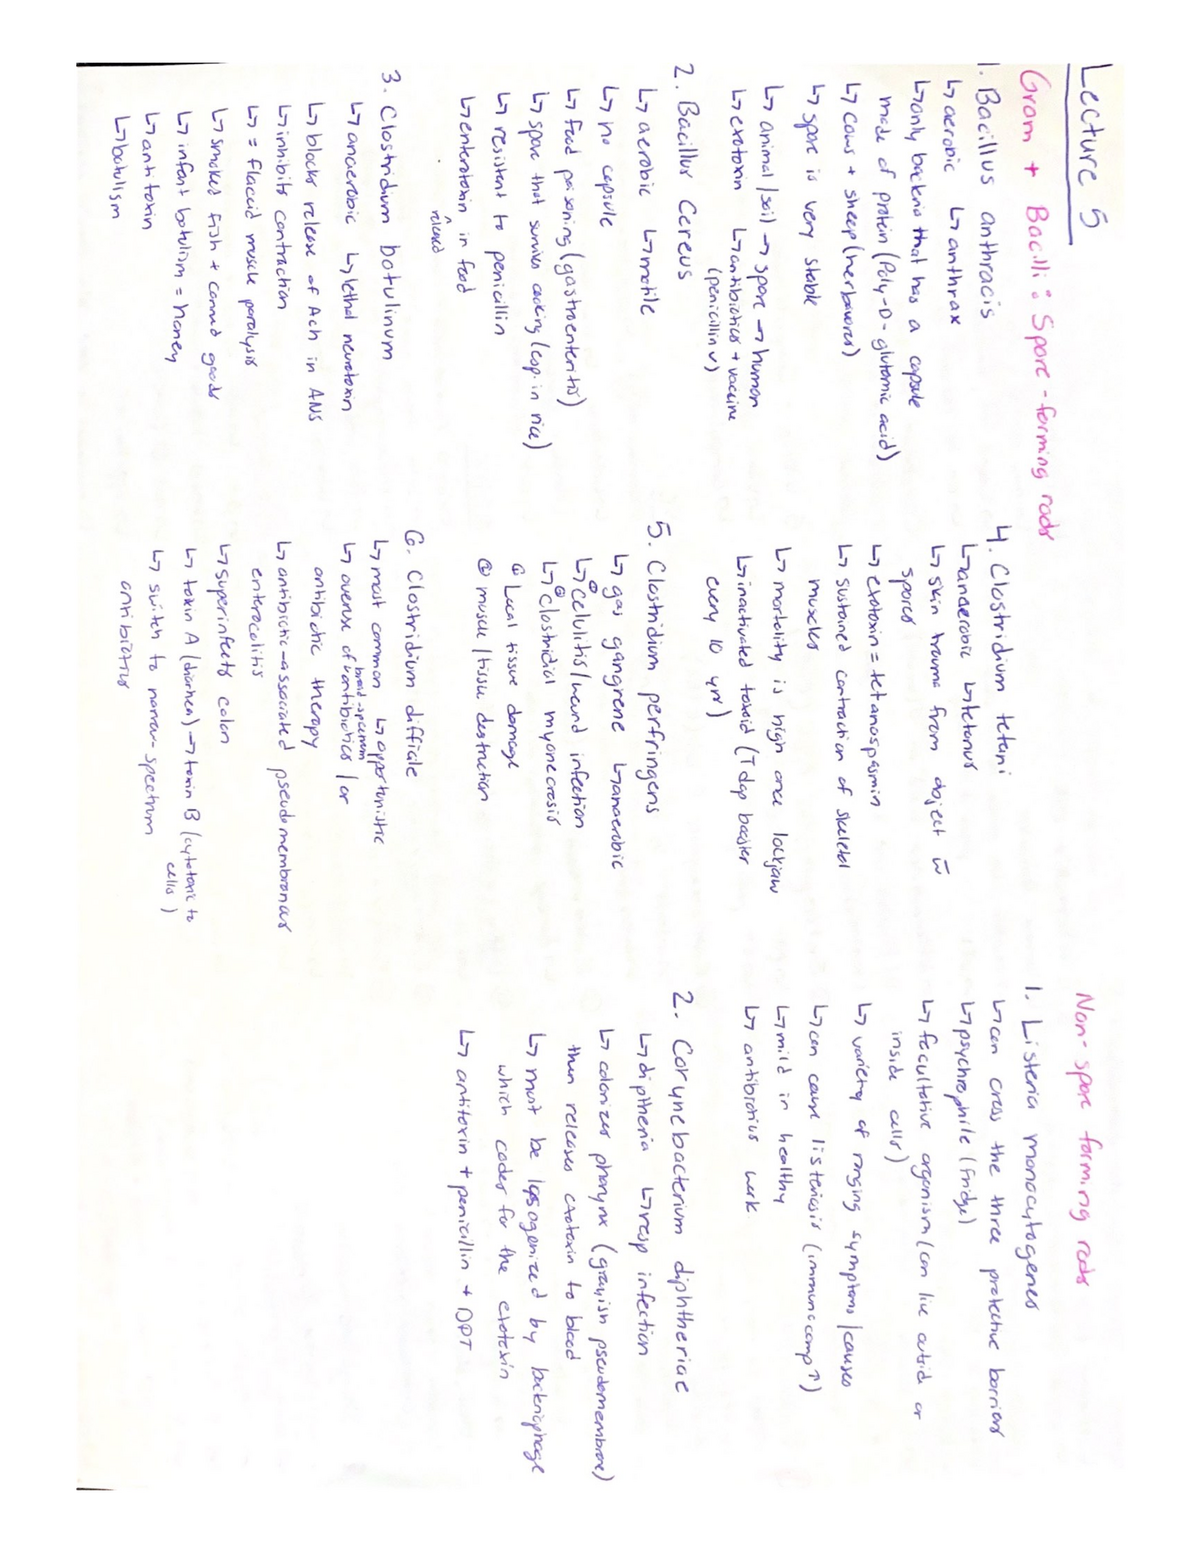 lecture-5-and-6-summary-chart-hss1100-studocu